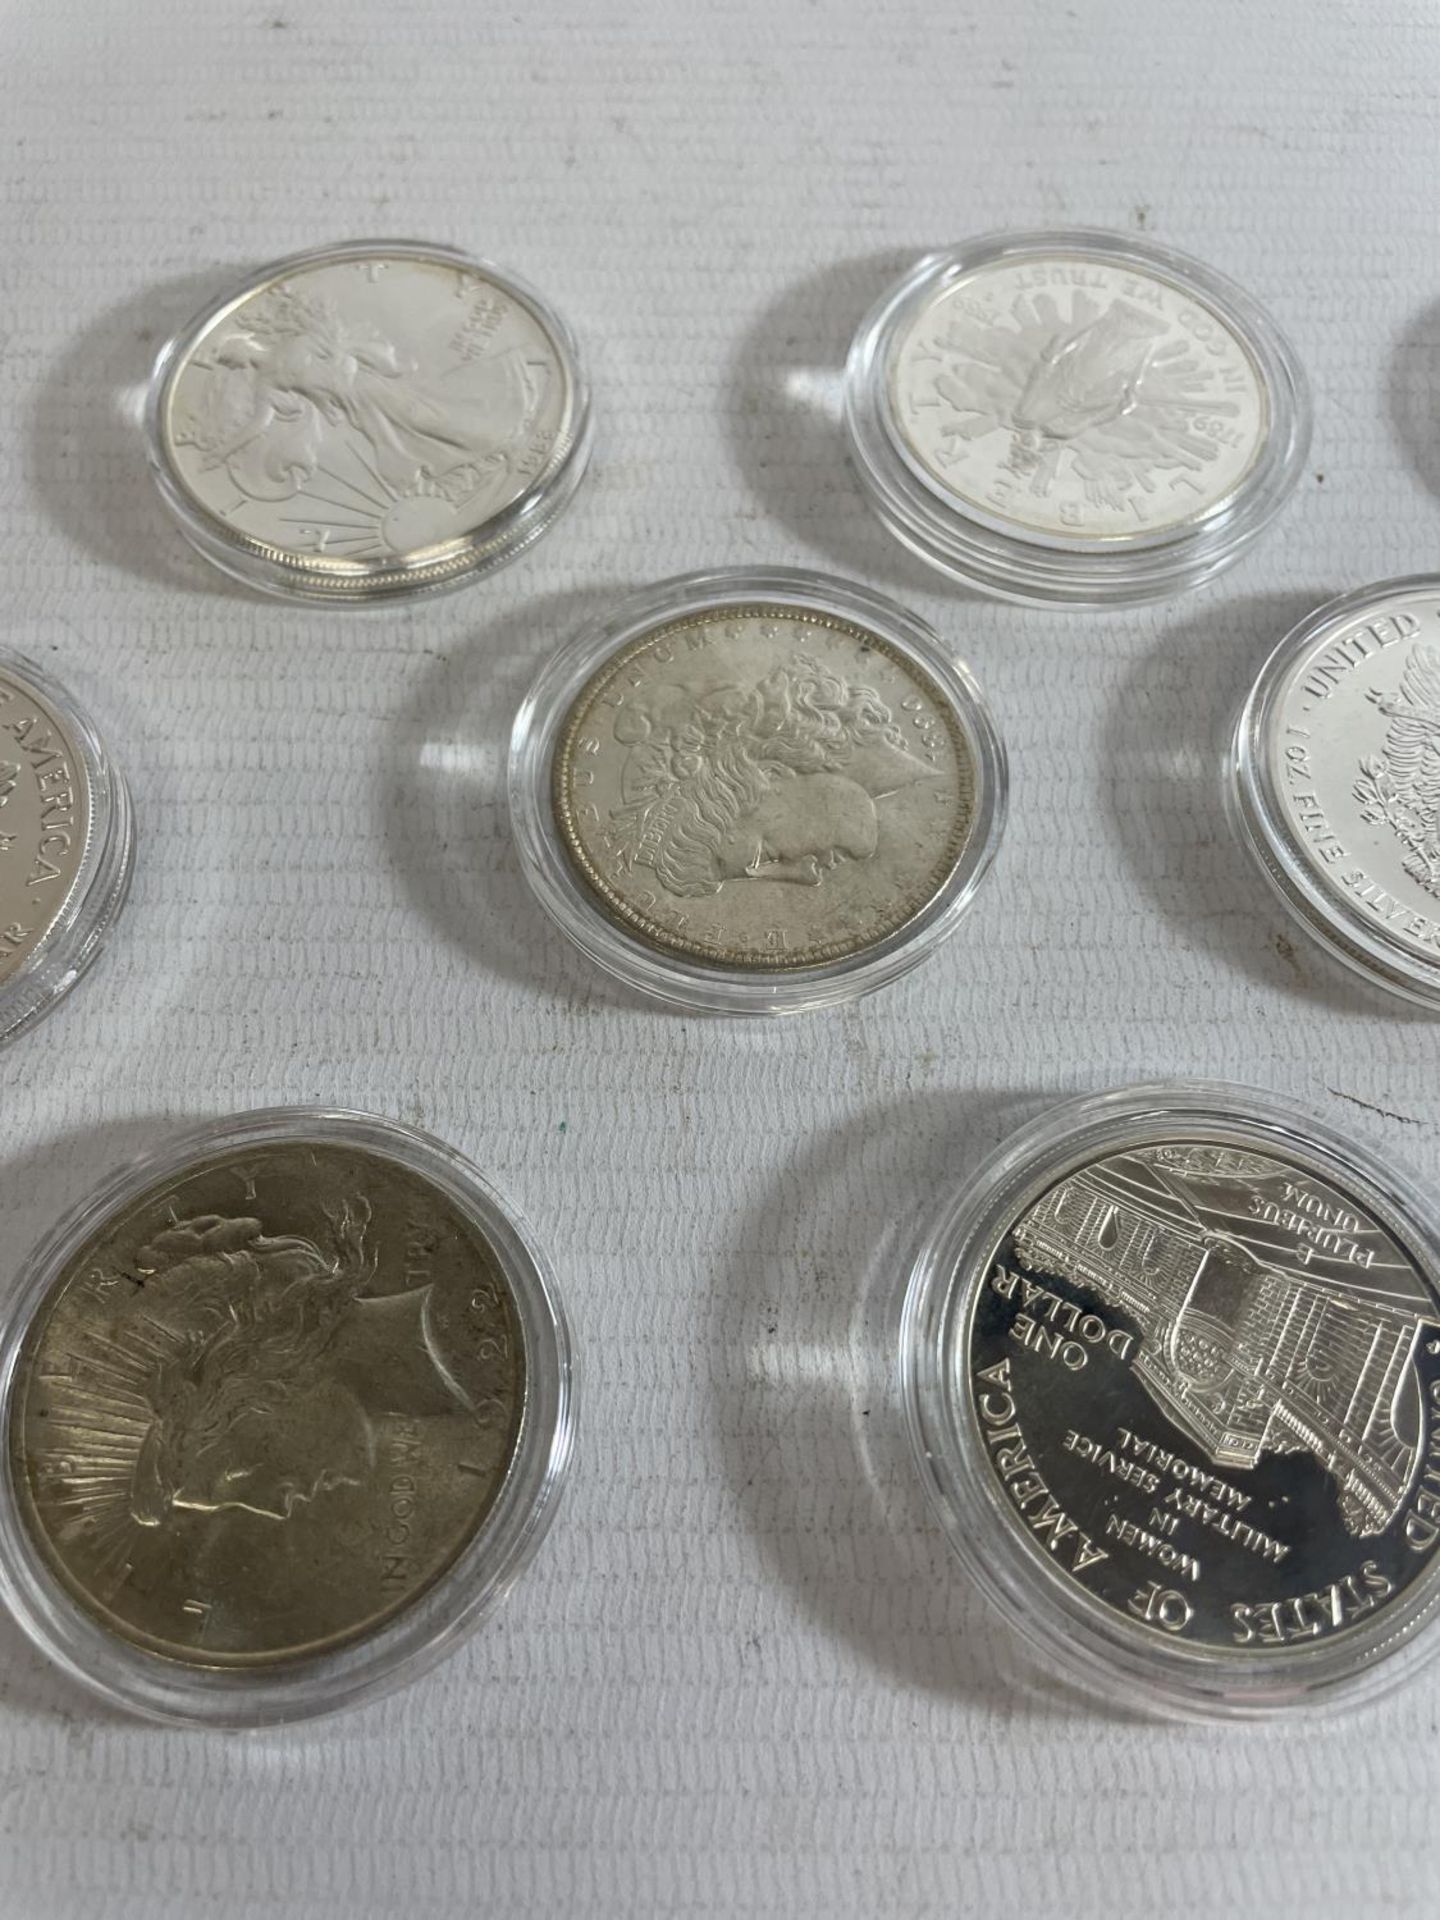 A SELECTION OF 10 USA SILVER $1 COINS , EACH ENCAPSULATED , DATED : 1890, 1922, 1987-8 , 1989 X 2, - Image 3 of 4